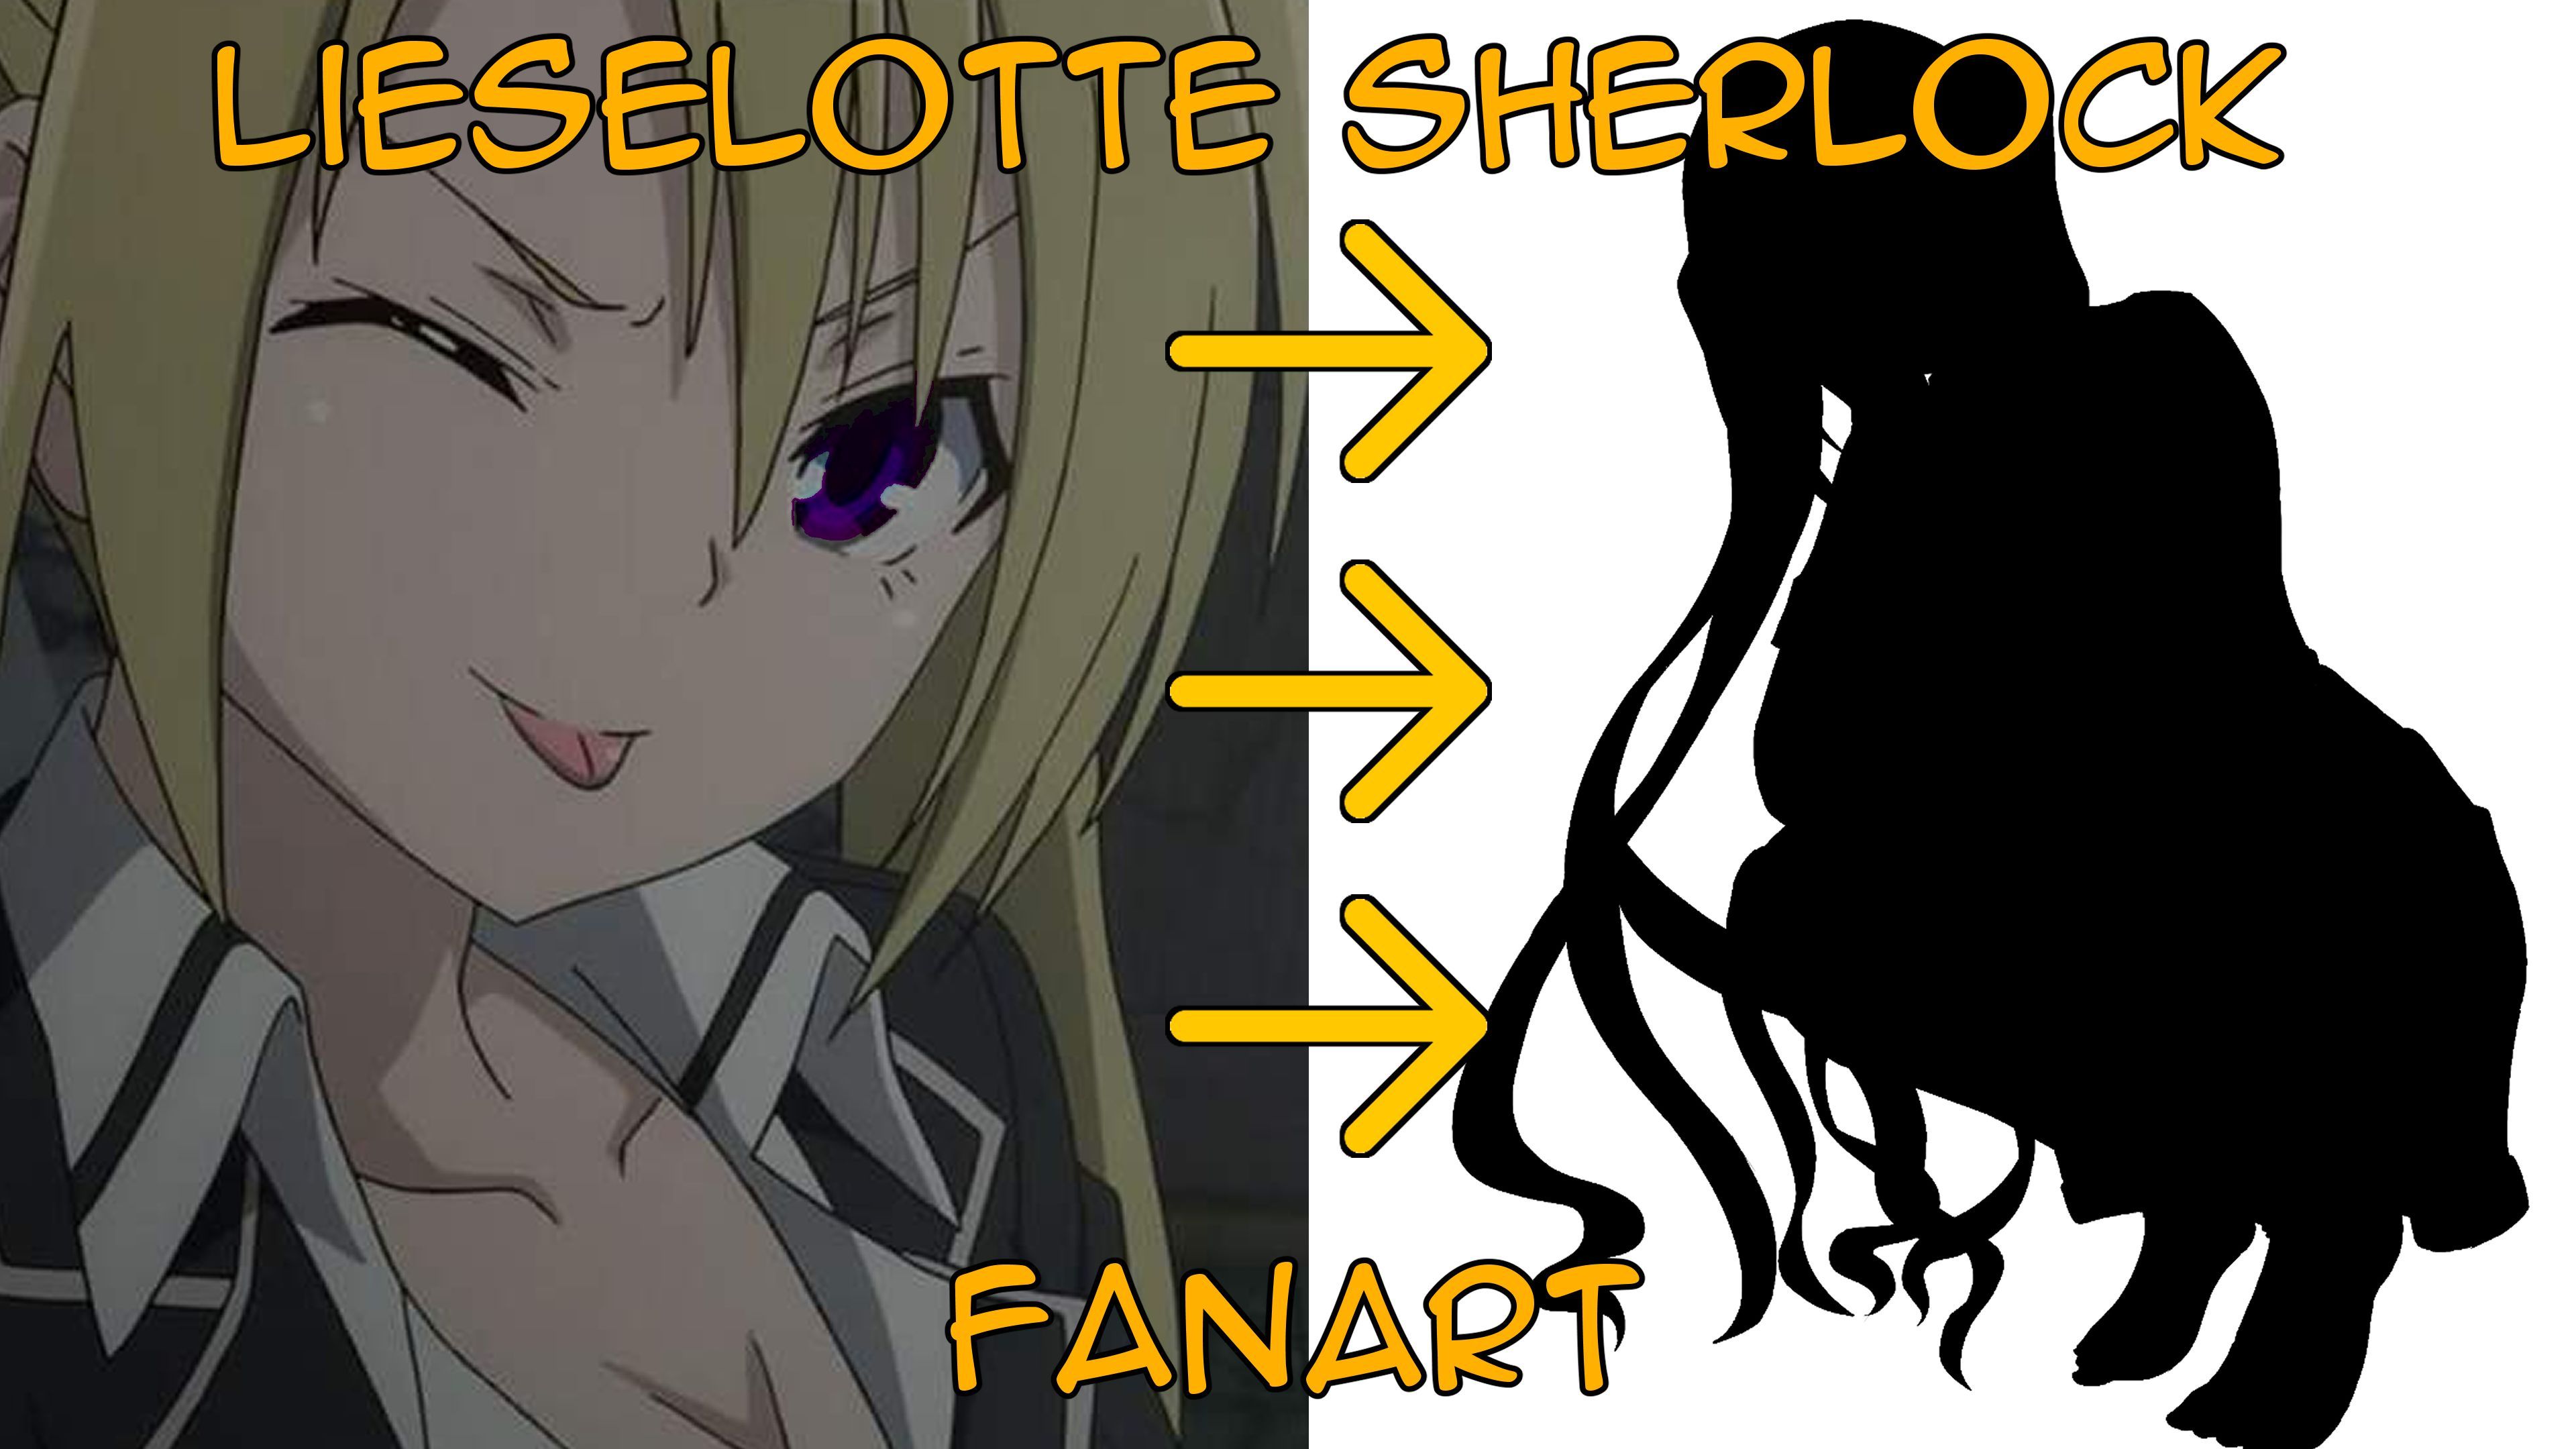 What are some animes like Sherlock Holmes? - Quora